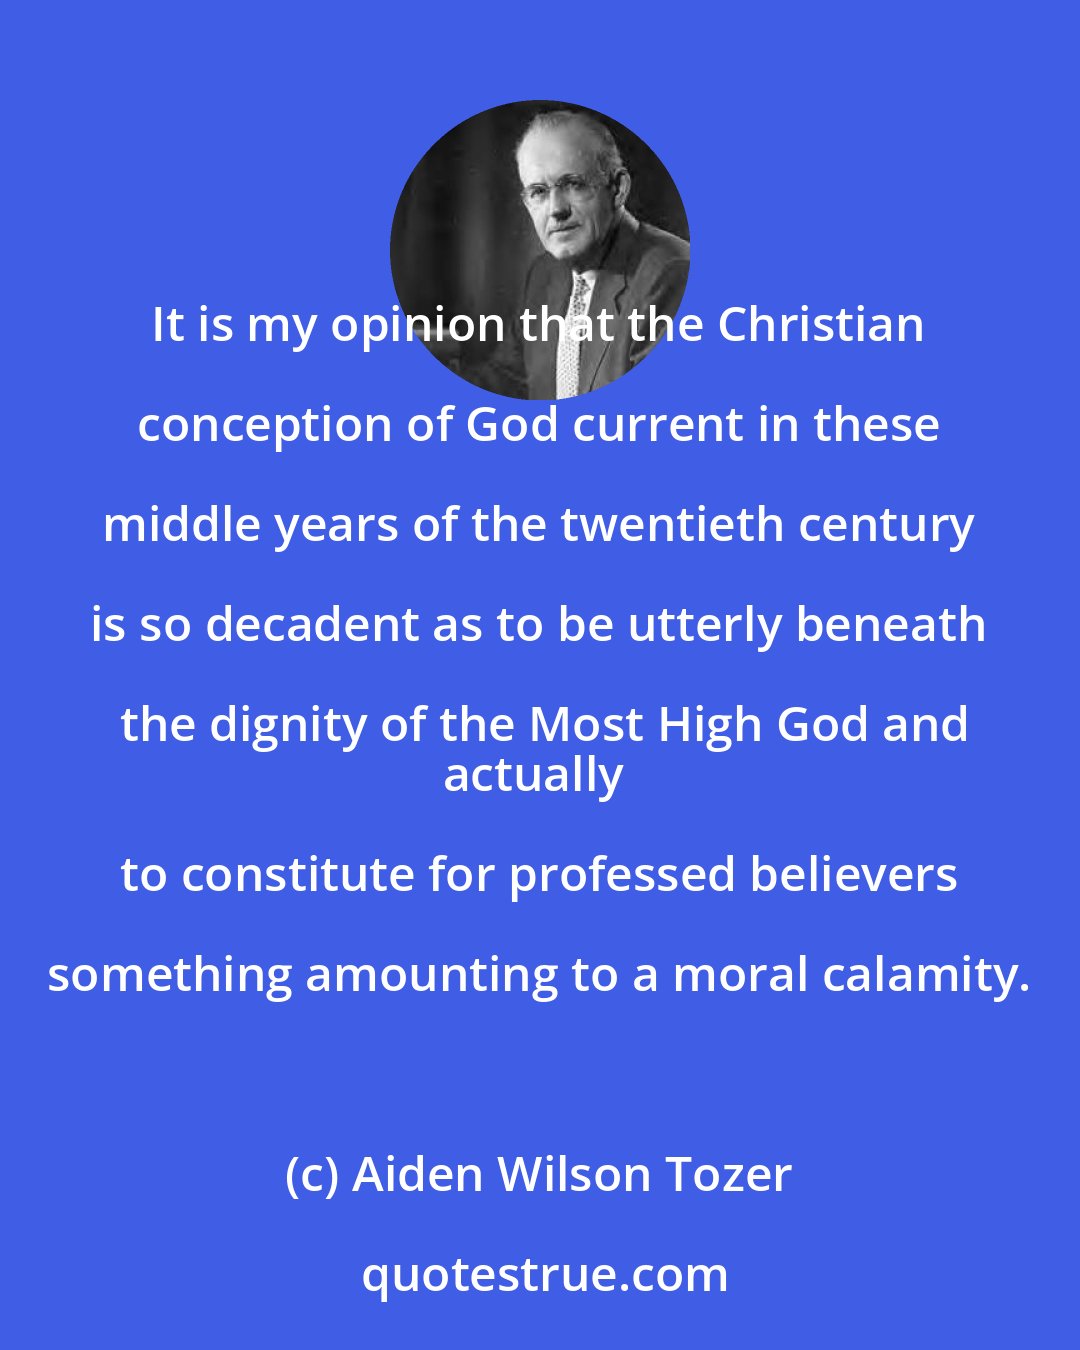 Aiden Wilson Tozer: It is my opinion that the Christian conception of God current in these middle years of the twentieth century is so decadent as to be utterly beneath the dignity of the Most High God and
actually to constitute for professed believers something amounting to a moral calamity.